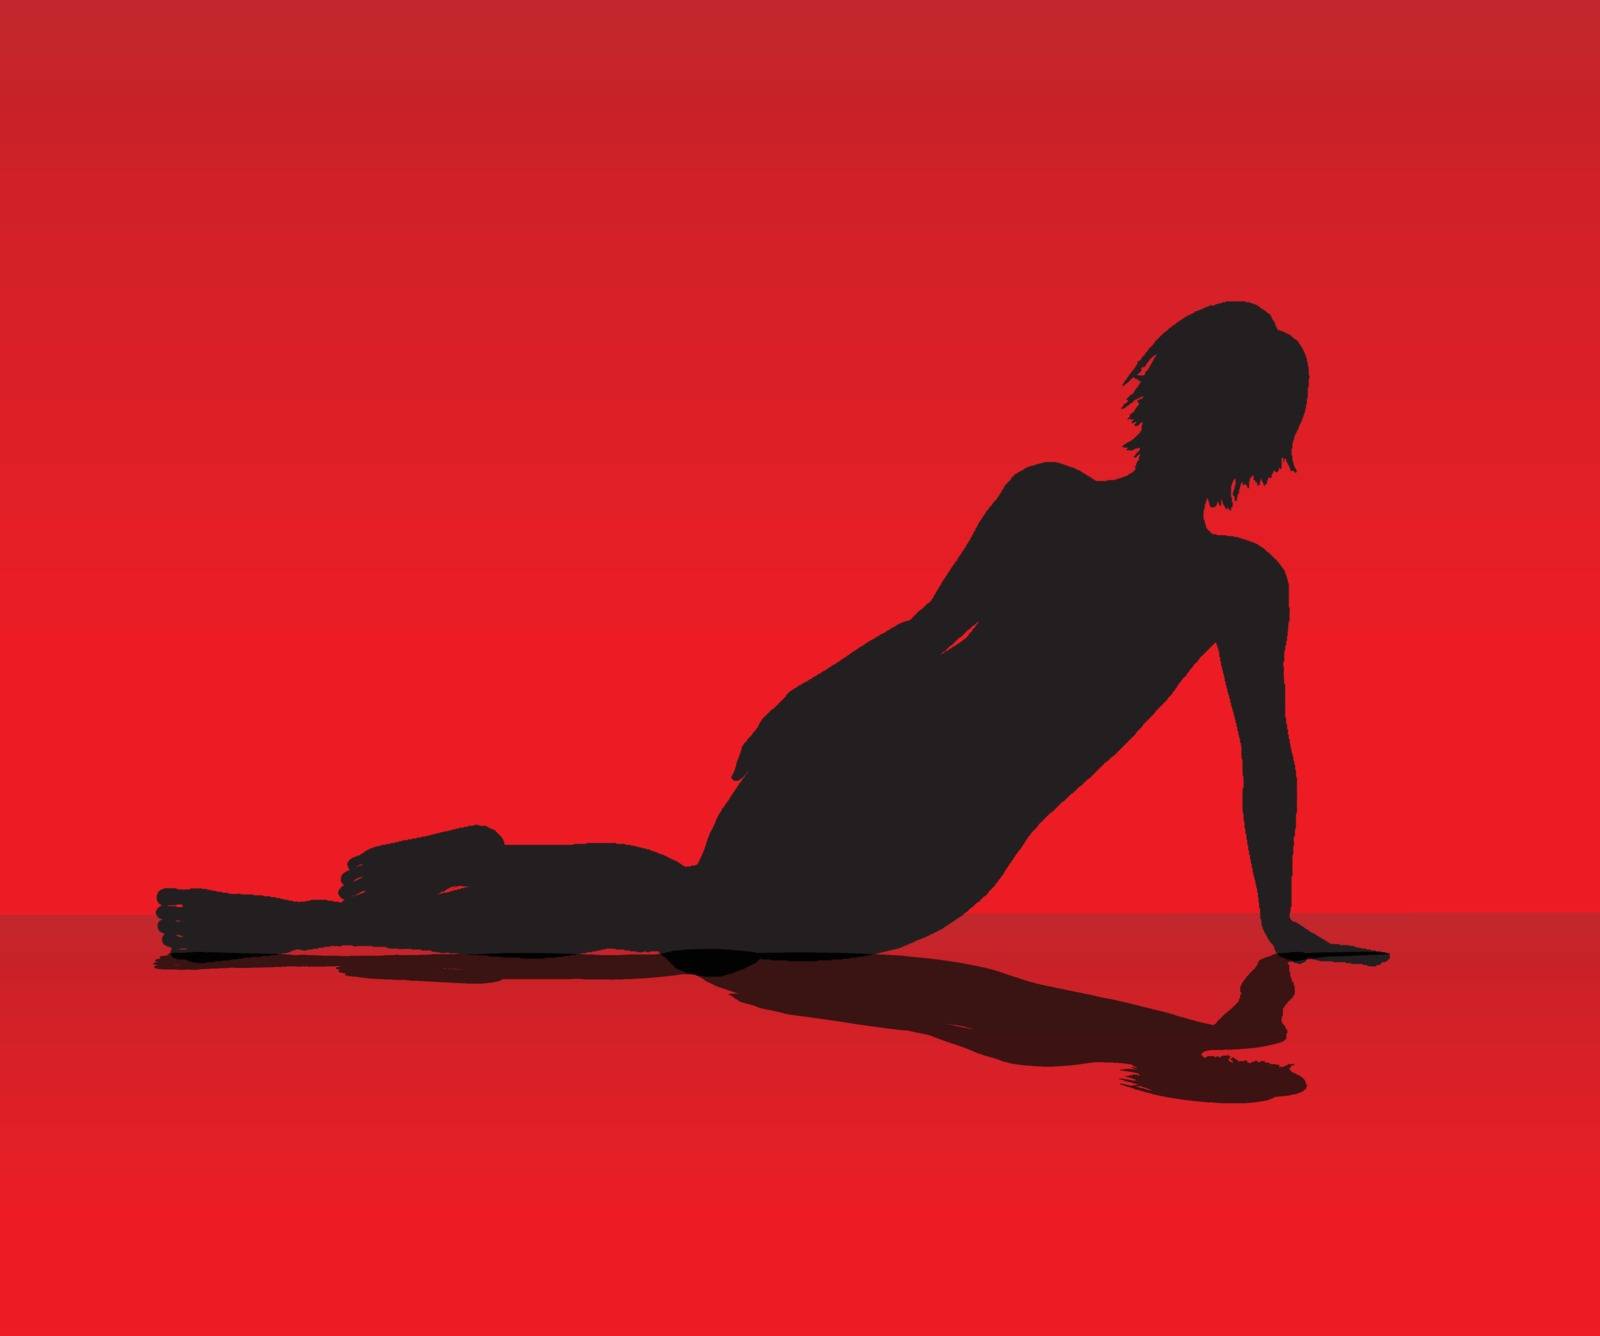 A female model resting on the floor set against a red background